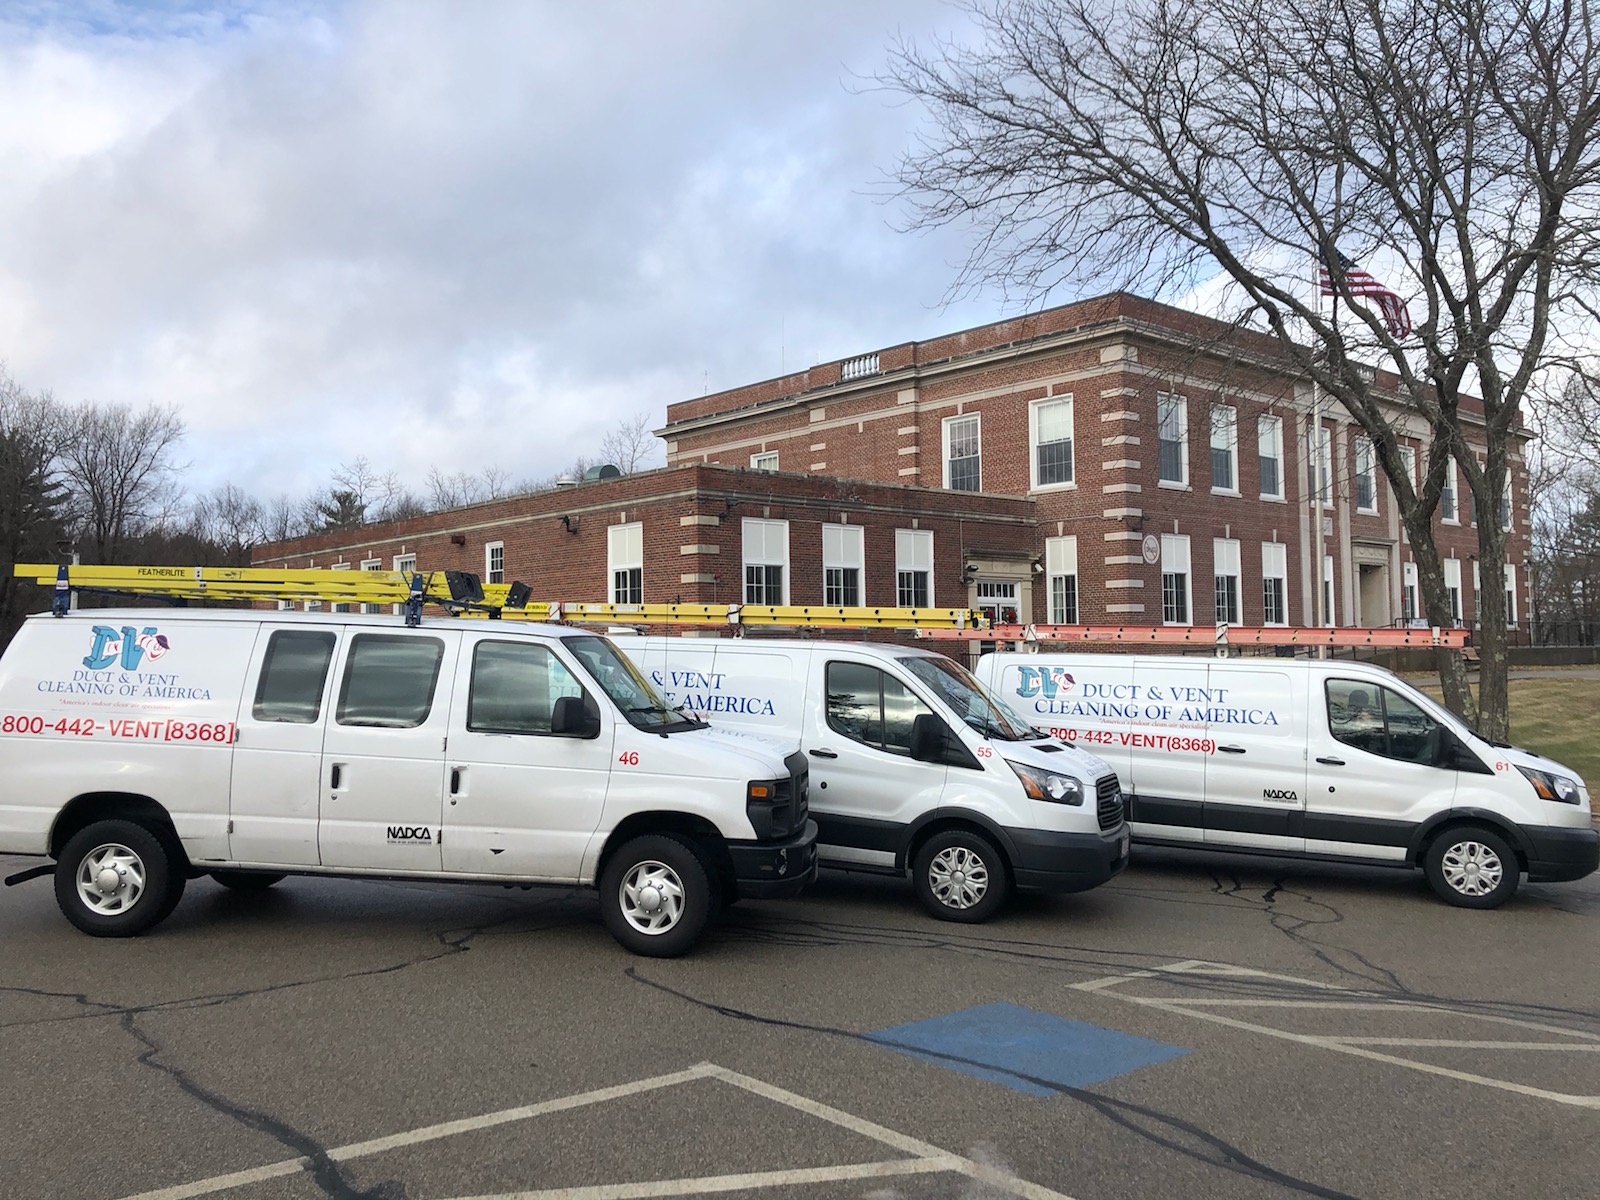 Town of Douglas - Office Duct and Vent Cleaning - Douglas, MA Town-of-Douglas.jpg